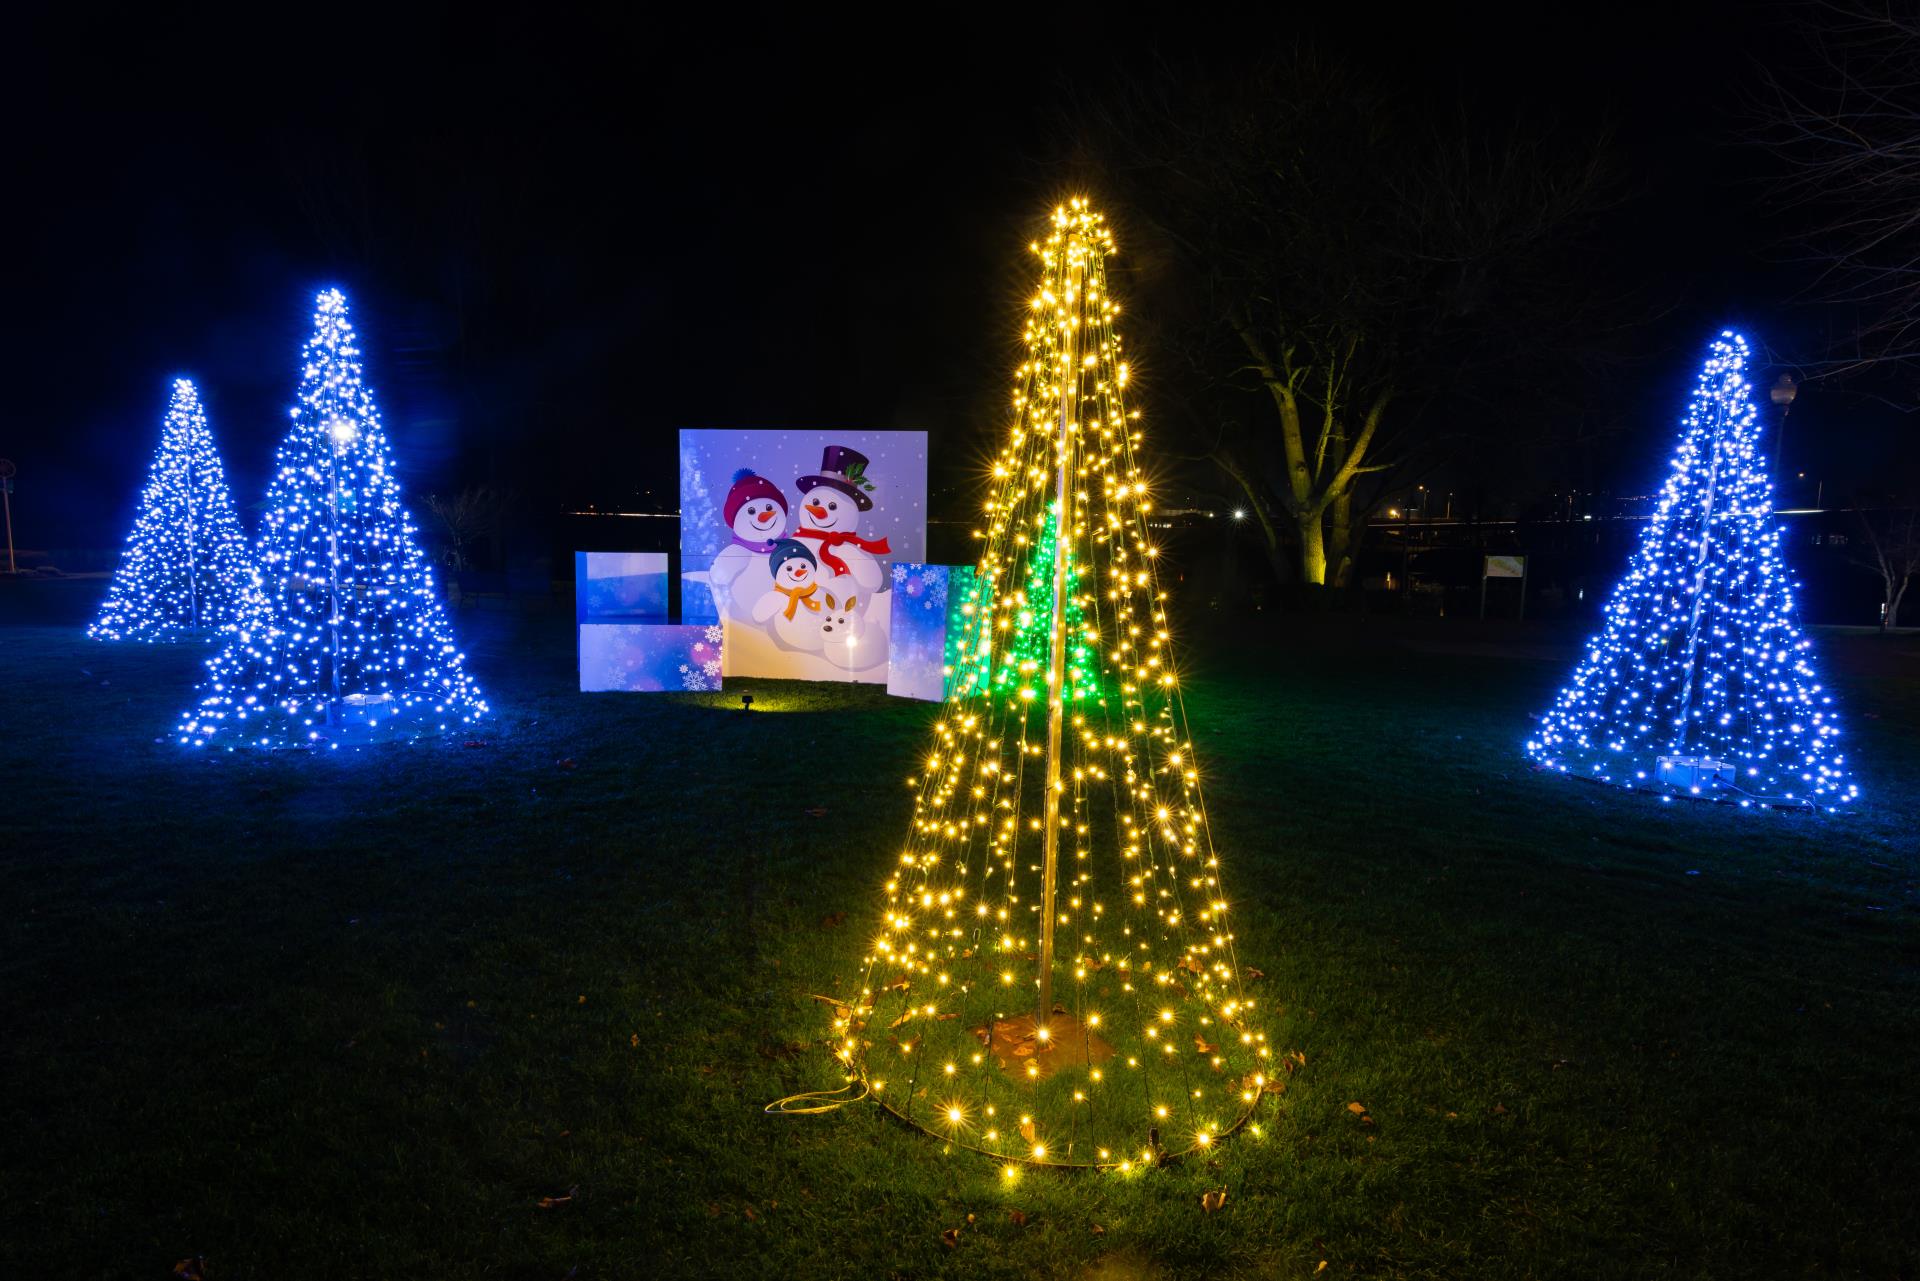 Riverfront Park will be A-Glow with Holiday Cheer Beginning Friday, December 2